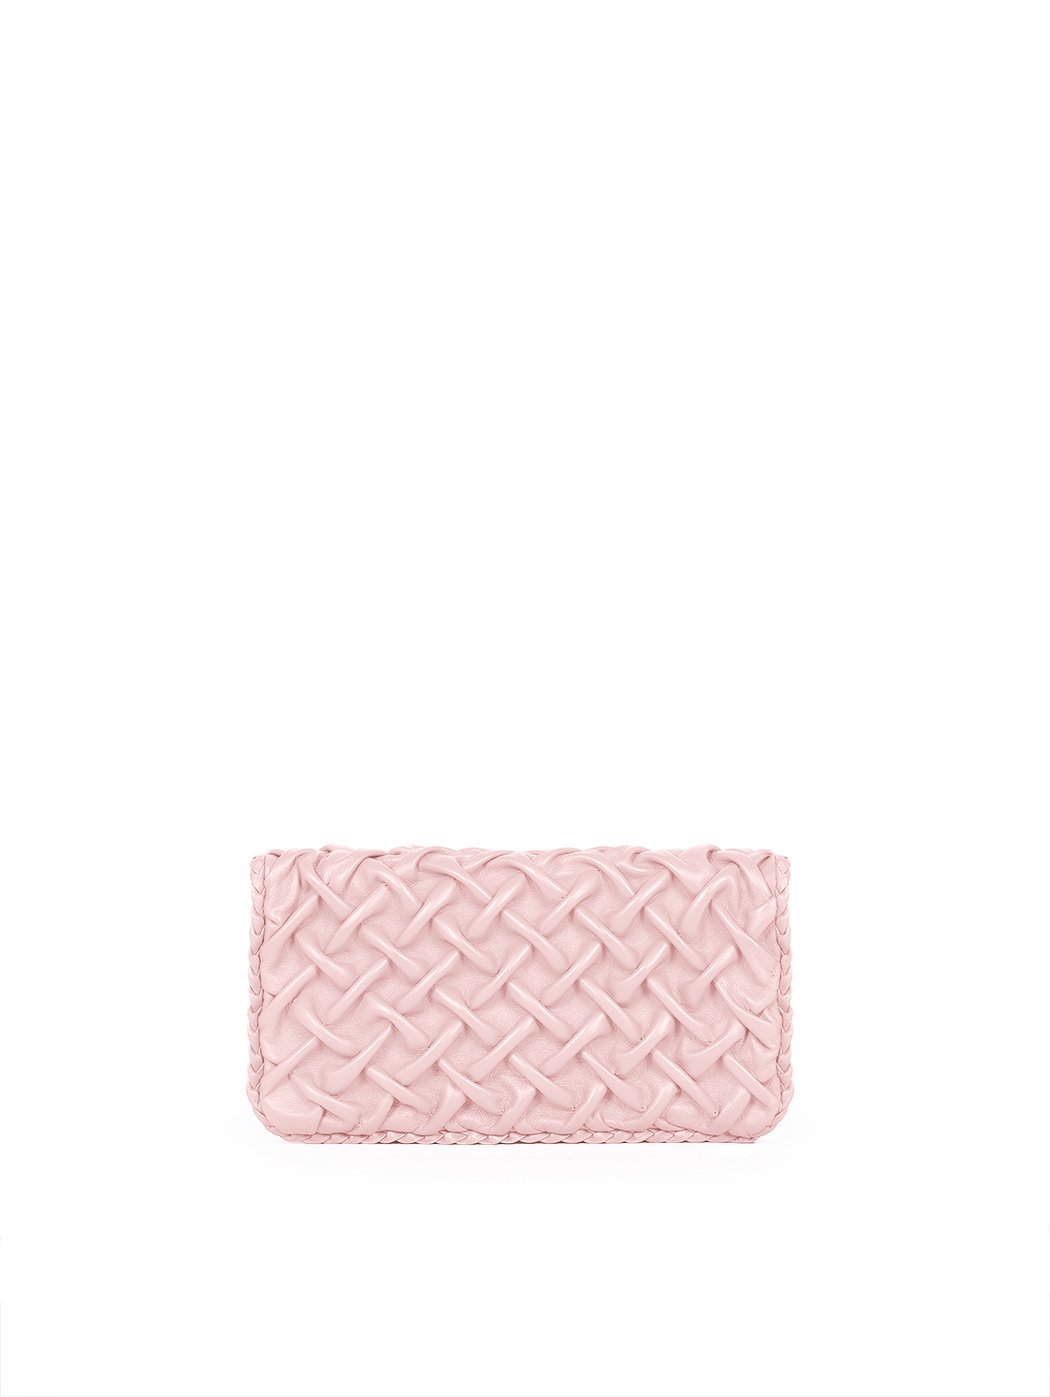 Foldover Crossbody Quilted Weave Clutch Leather Pink